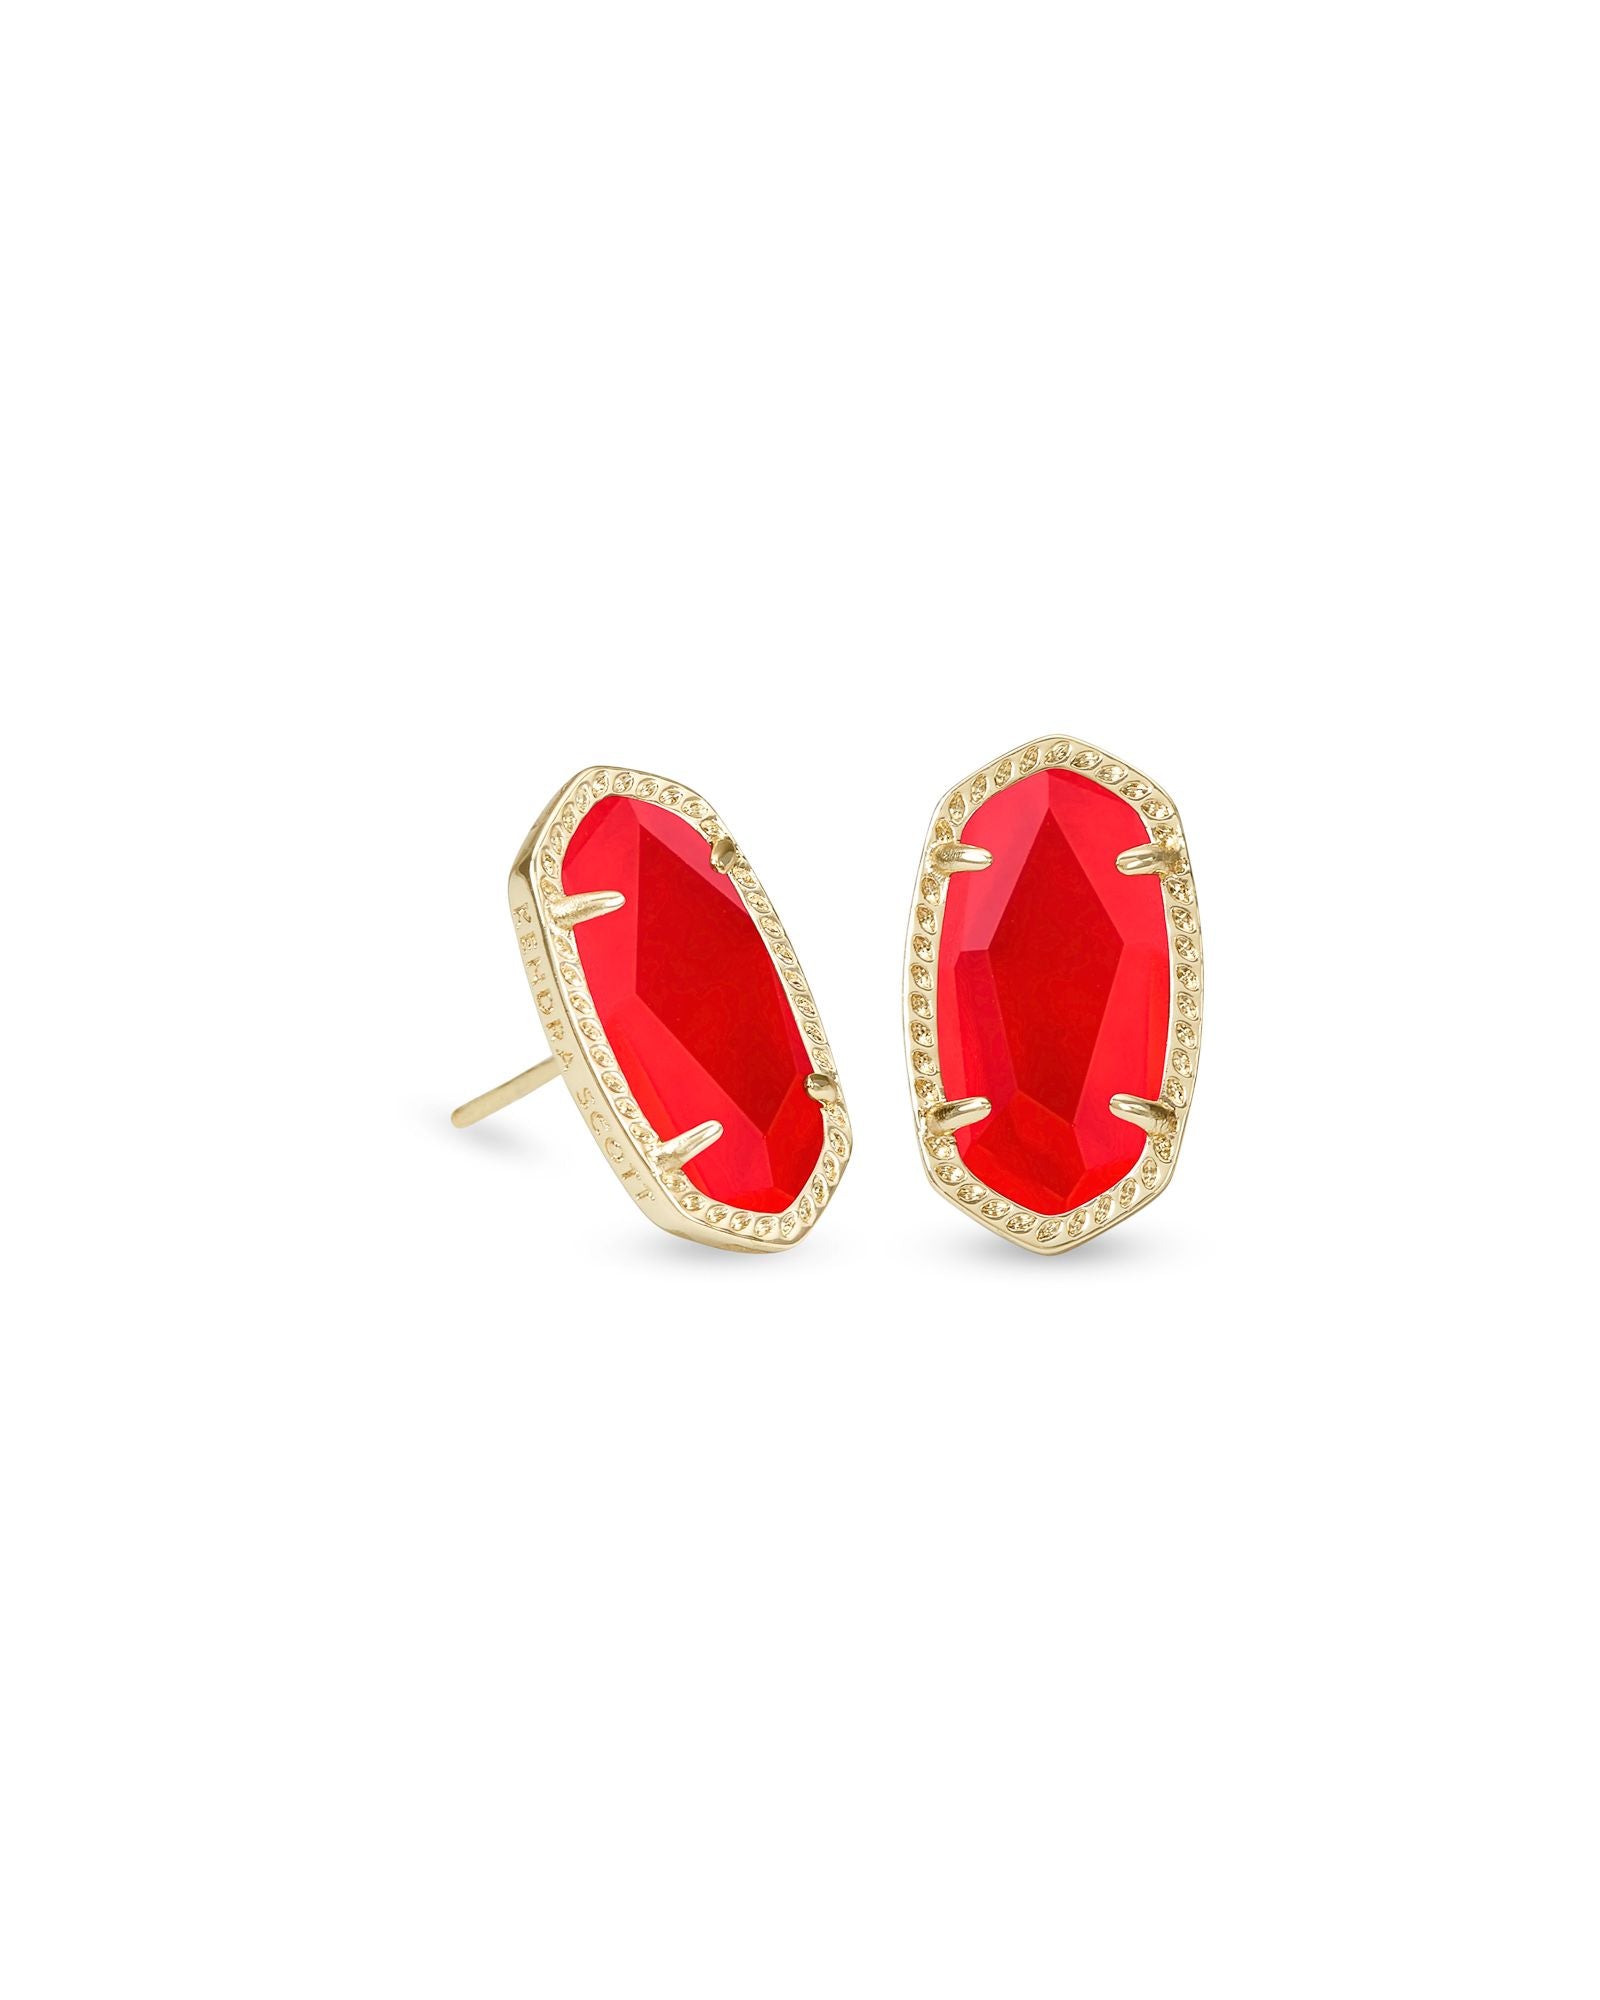 Kendra Scott | Ellie Gold Stud Earrings in Red Illusion - Giddy Up Glamour Boutique